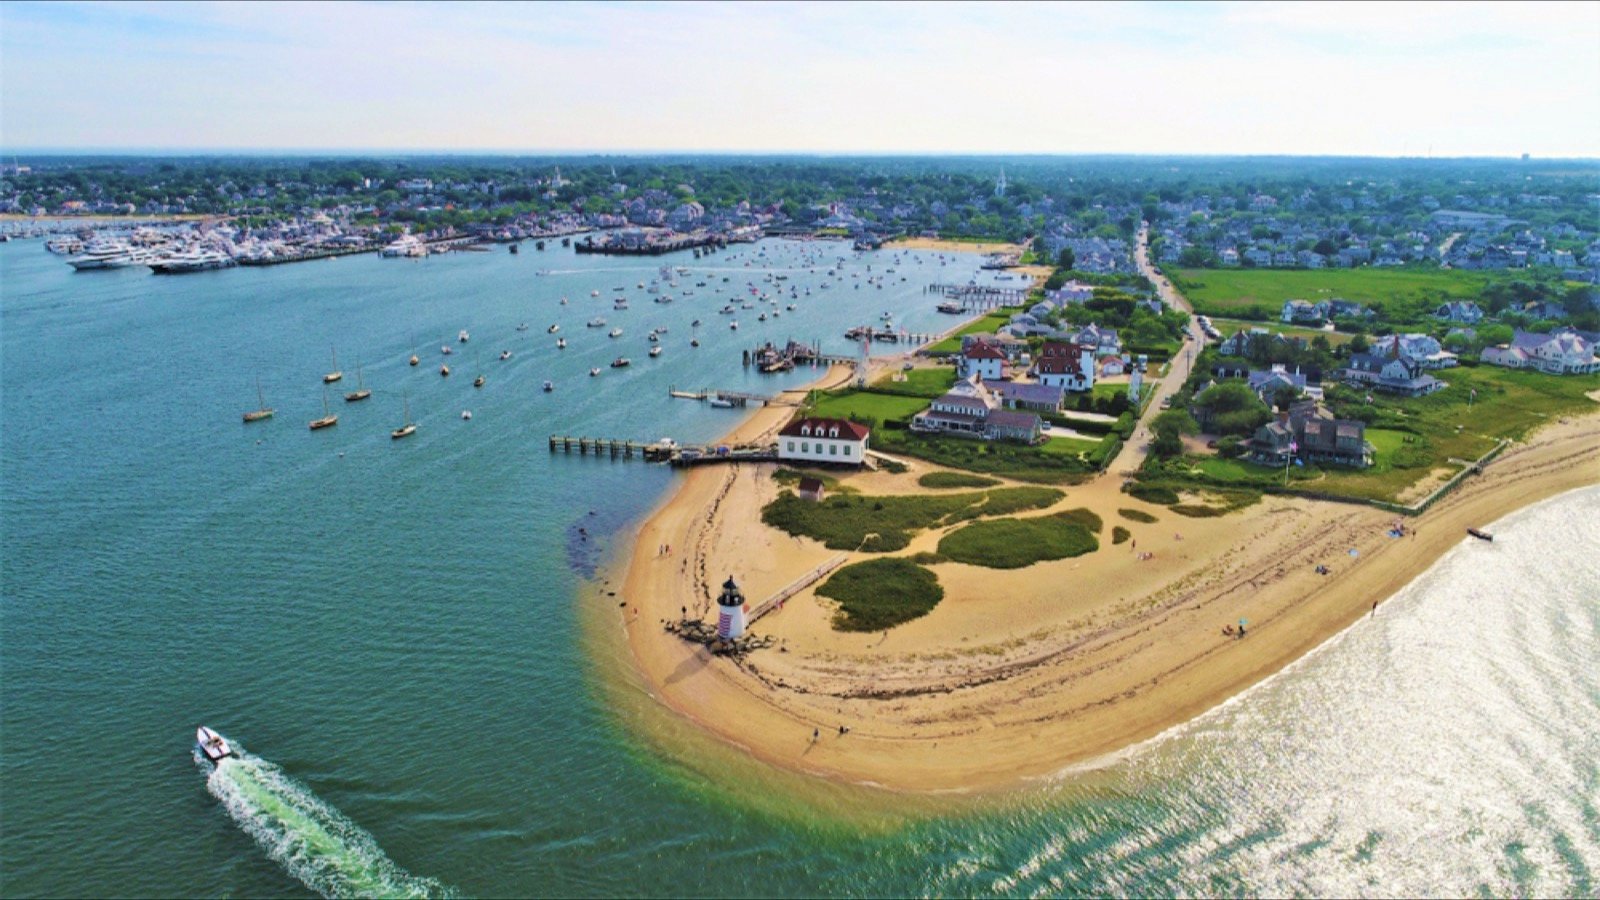 <p>This charming island off the coast of Cape Cod is known for its cobblestone streets, weather-beaten wharves, and Main Street, lined with boutiques, shops, restaurants, and museums.</p><p>The island is only 50 square miles, making it a prime destination for people searching for a secluded beach town with a rich history.</p>